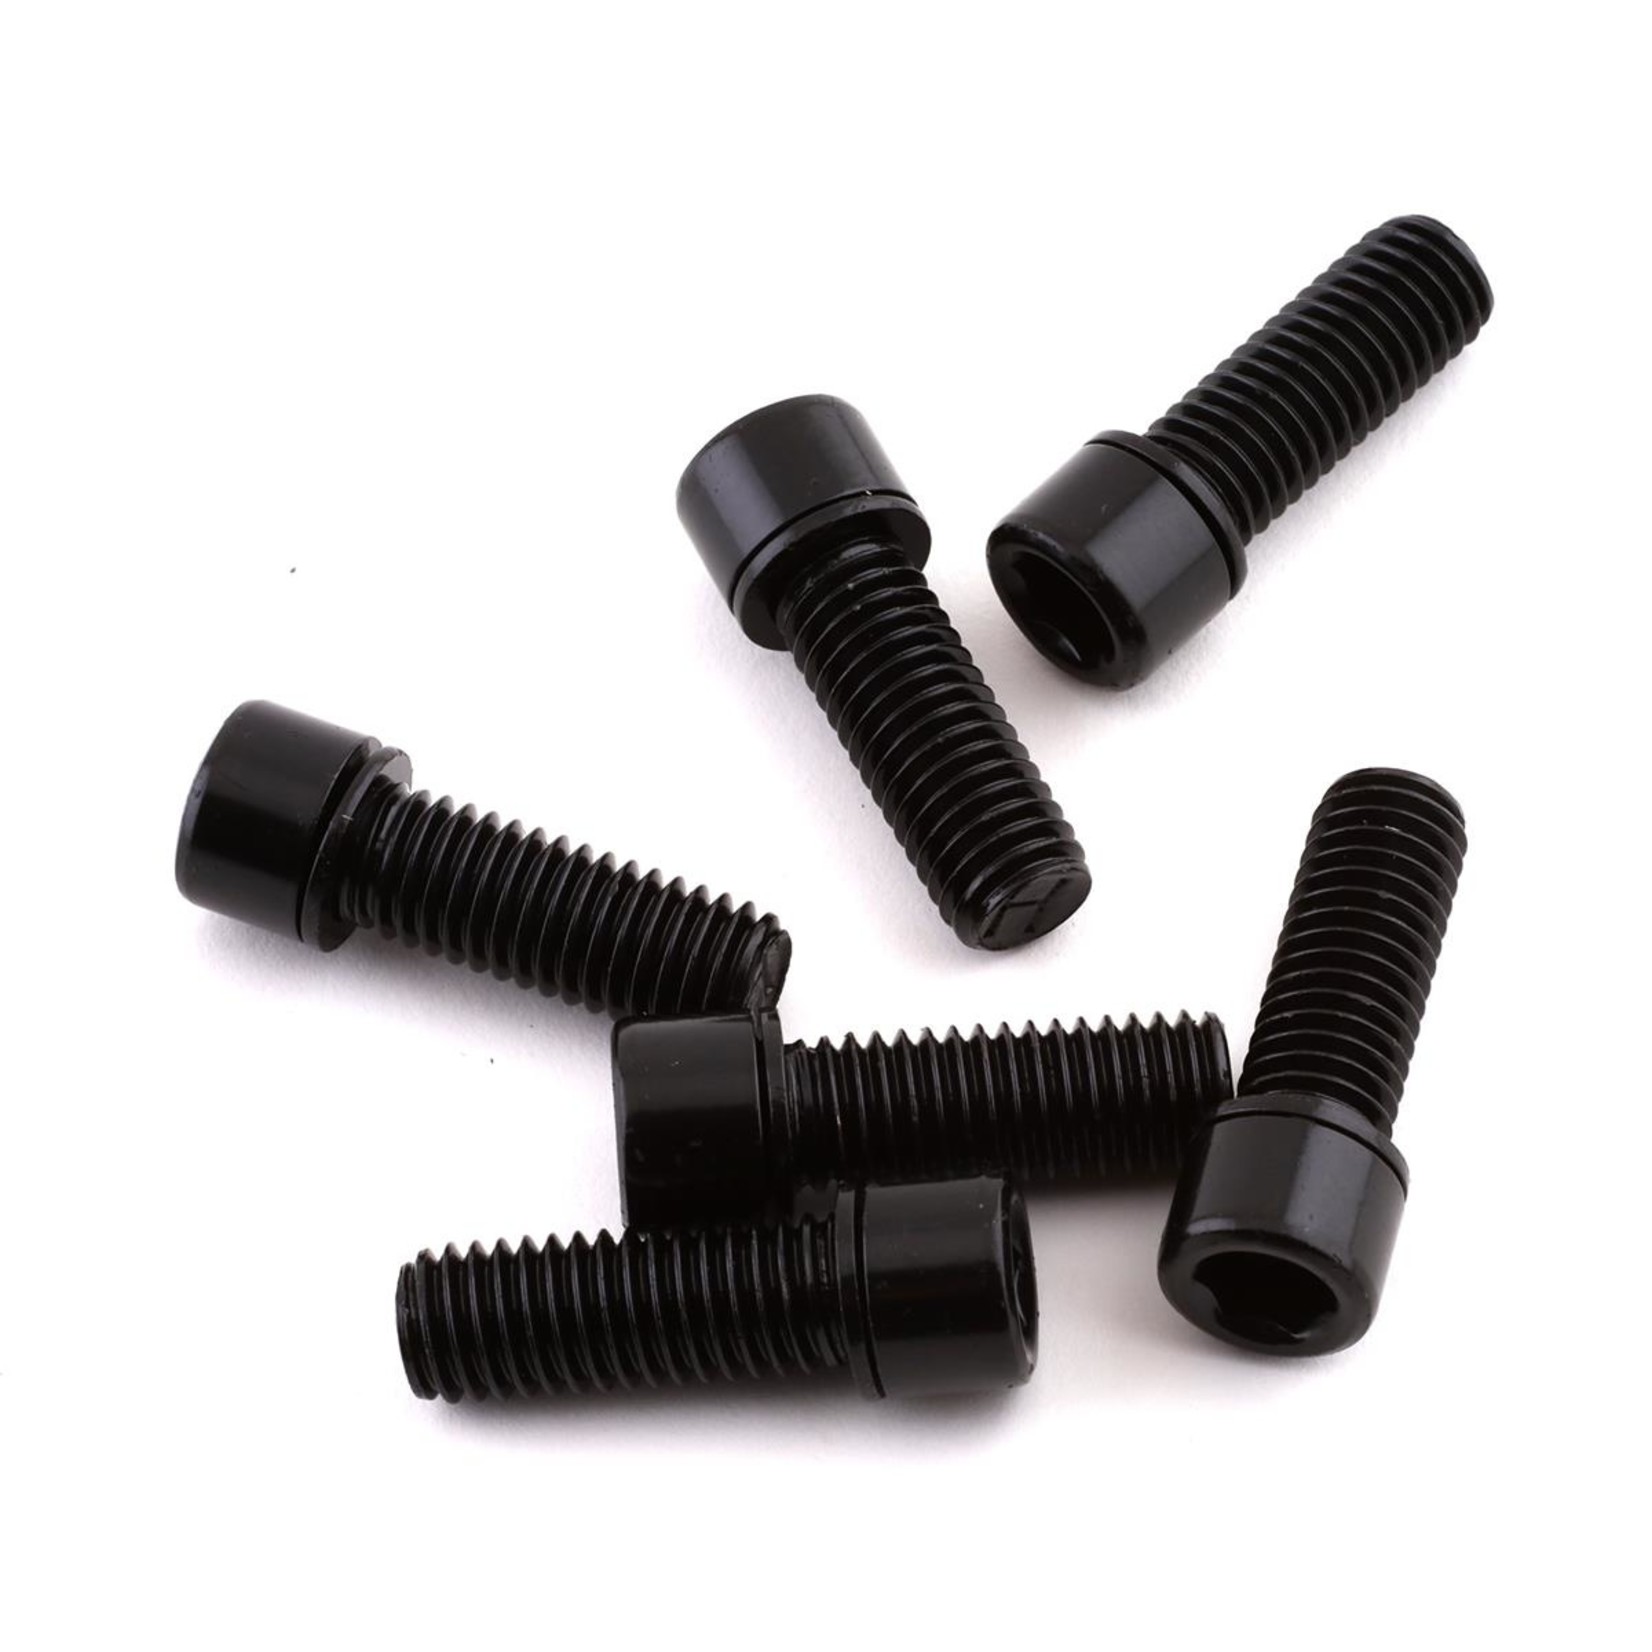 S&M S&M - Six replacement bolts & washers for OEM stems